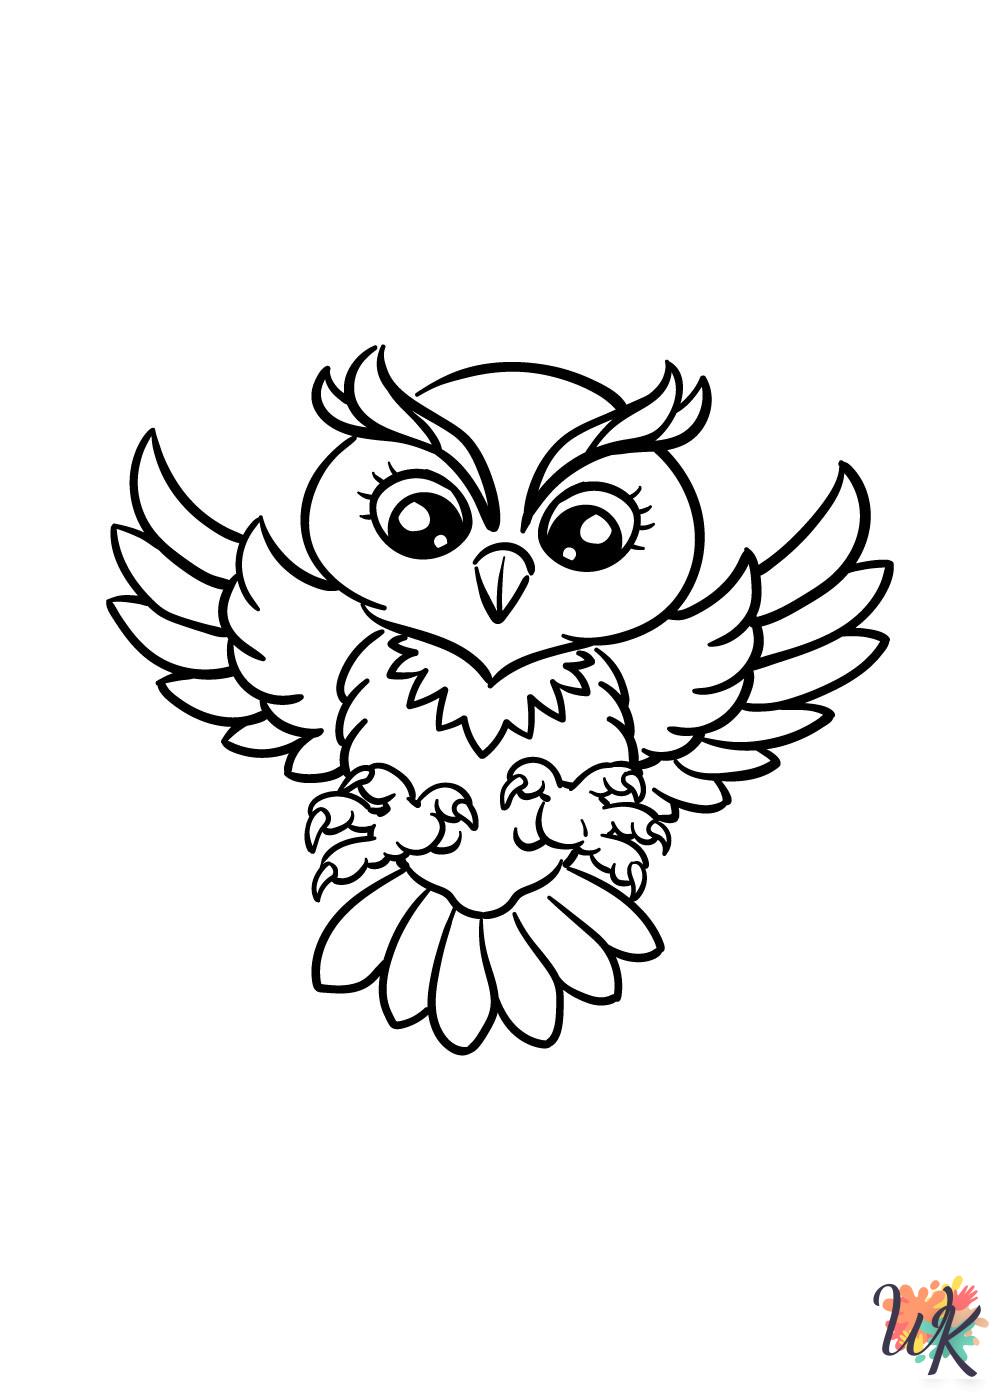 Owl free coloring pages